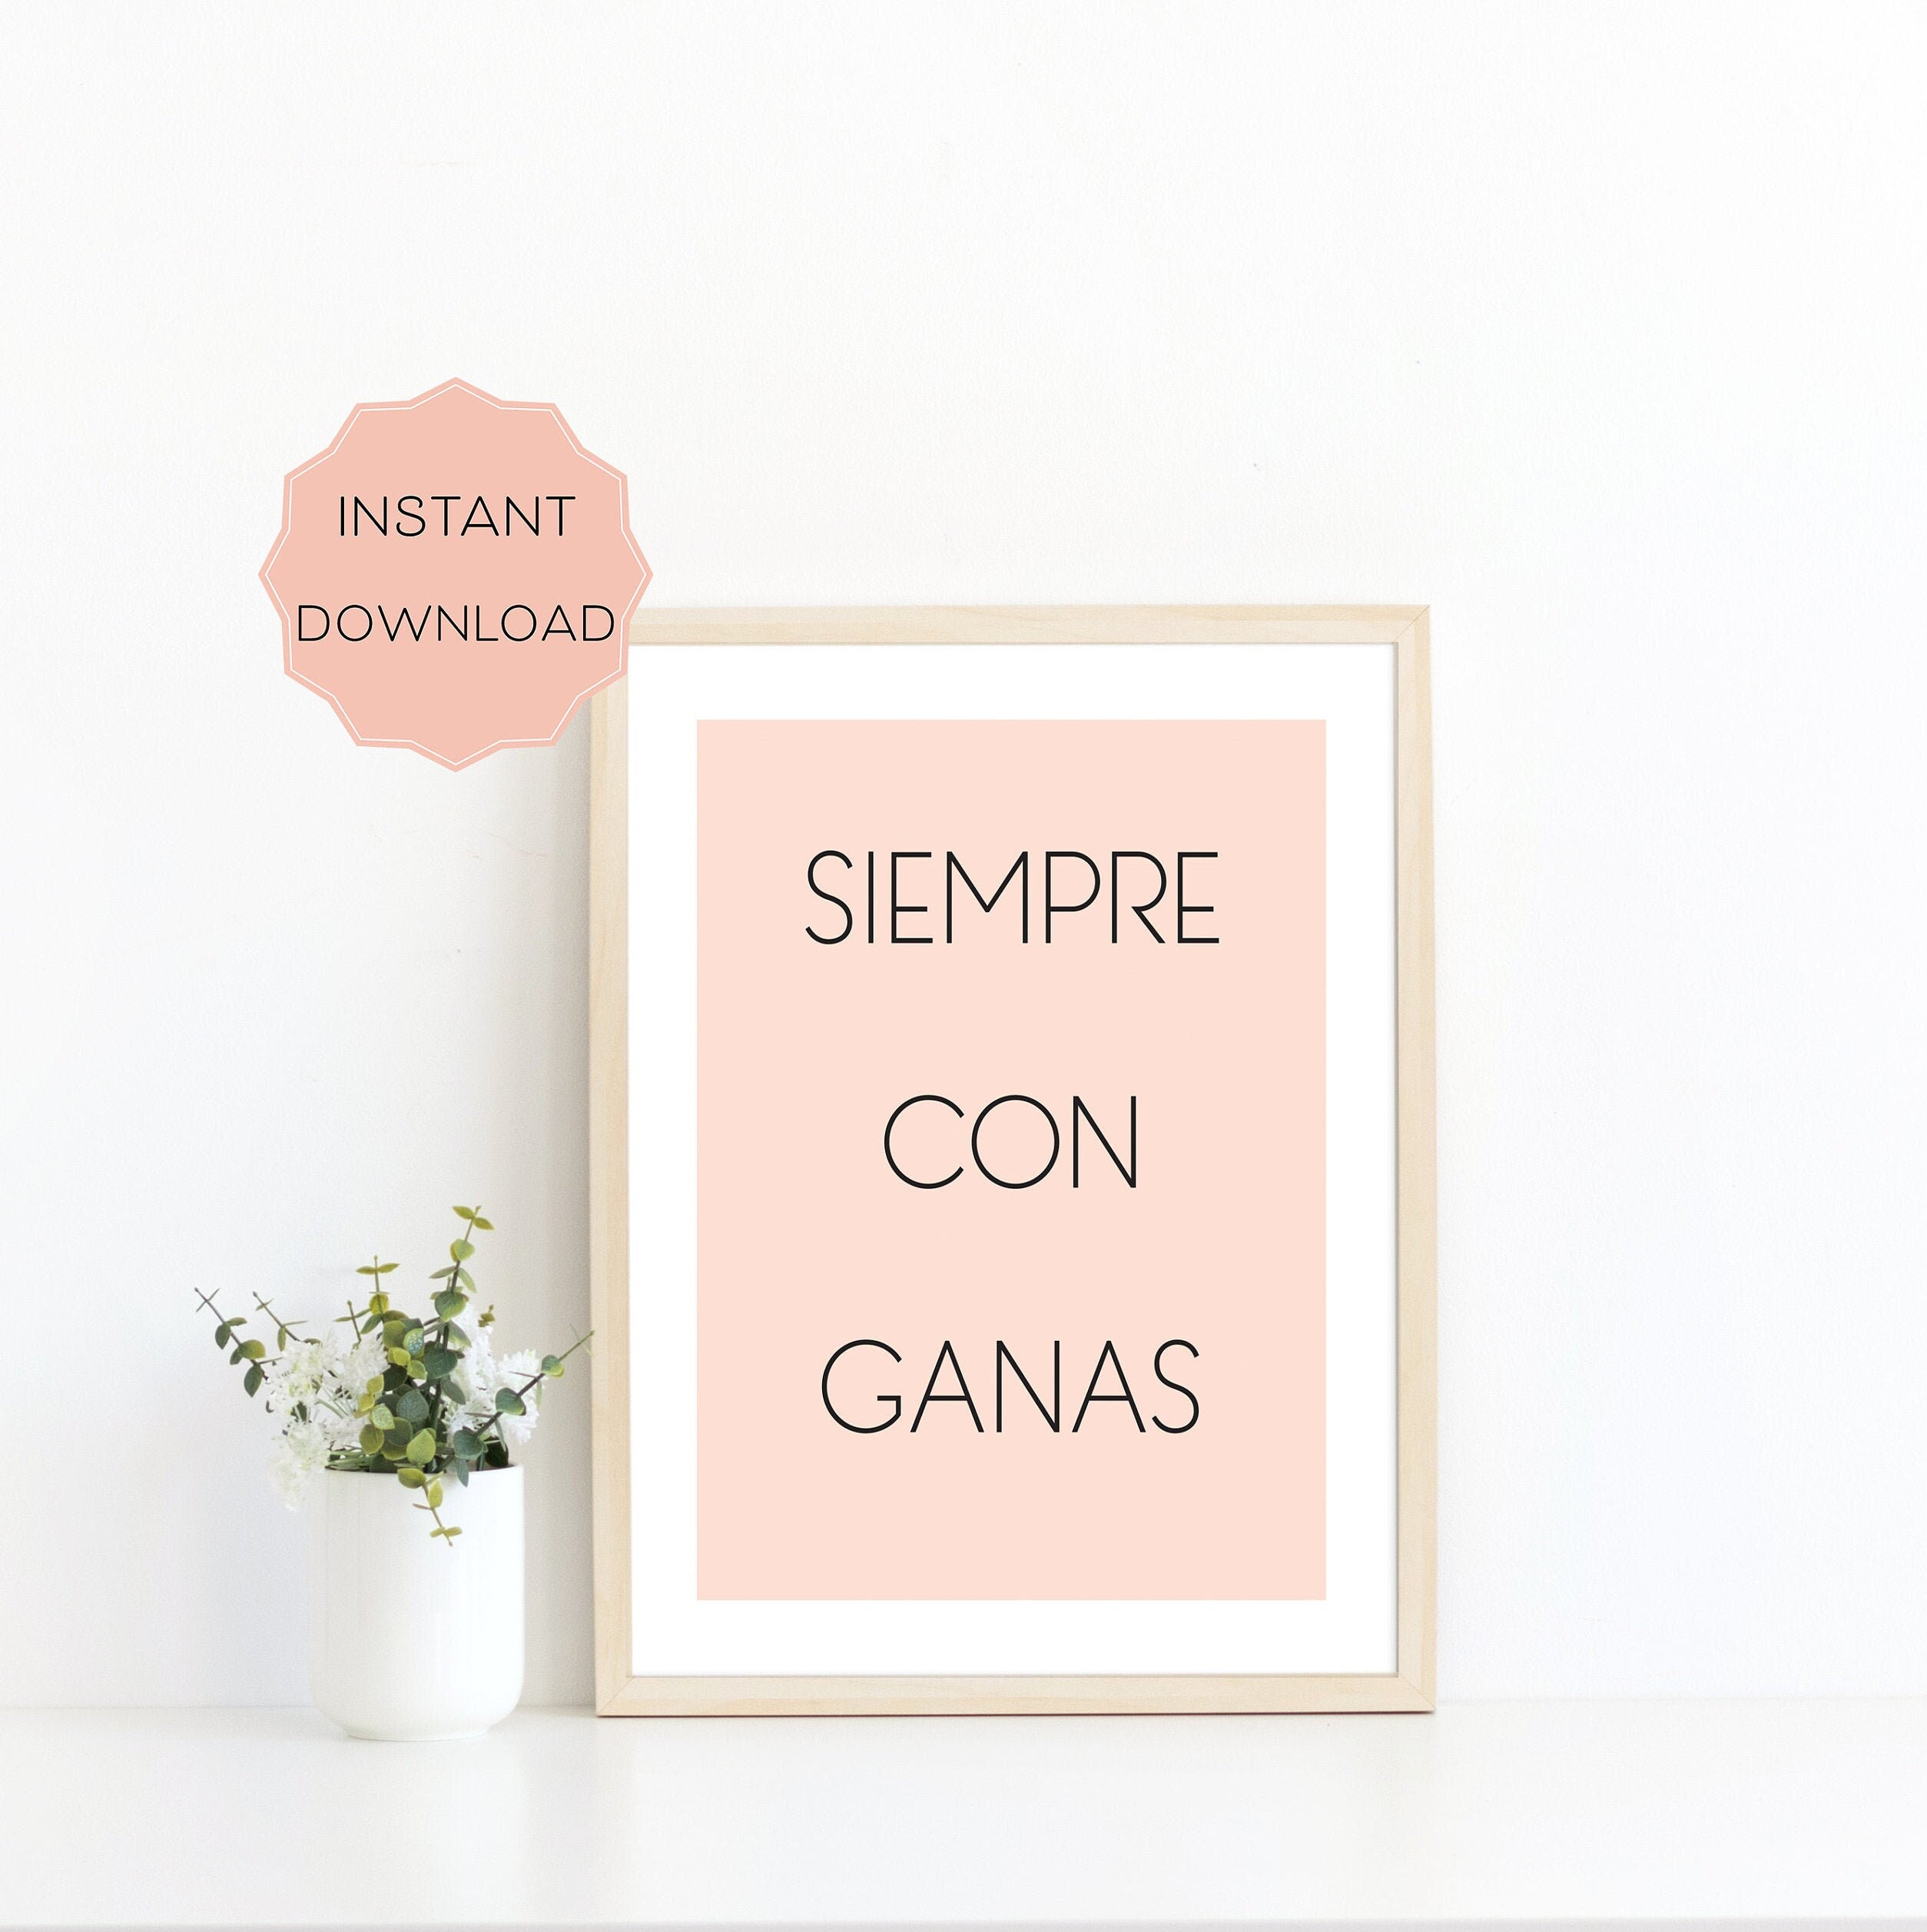 Download and ready to print for home or office ponte las pilas quote wall hanging with pink flowers 8x10 instant printable